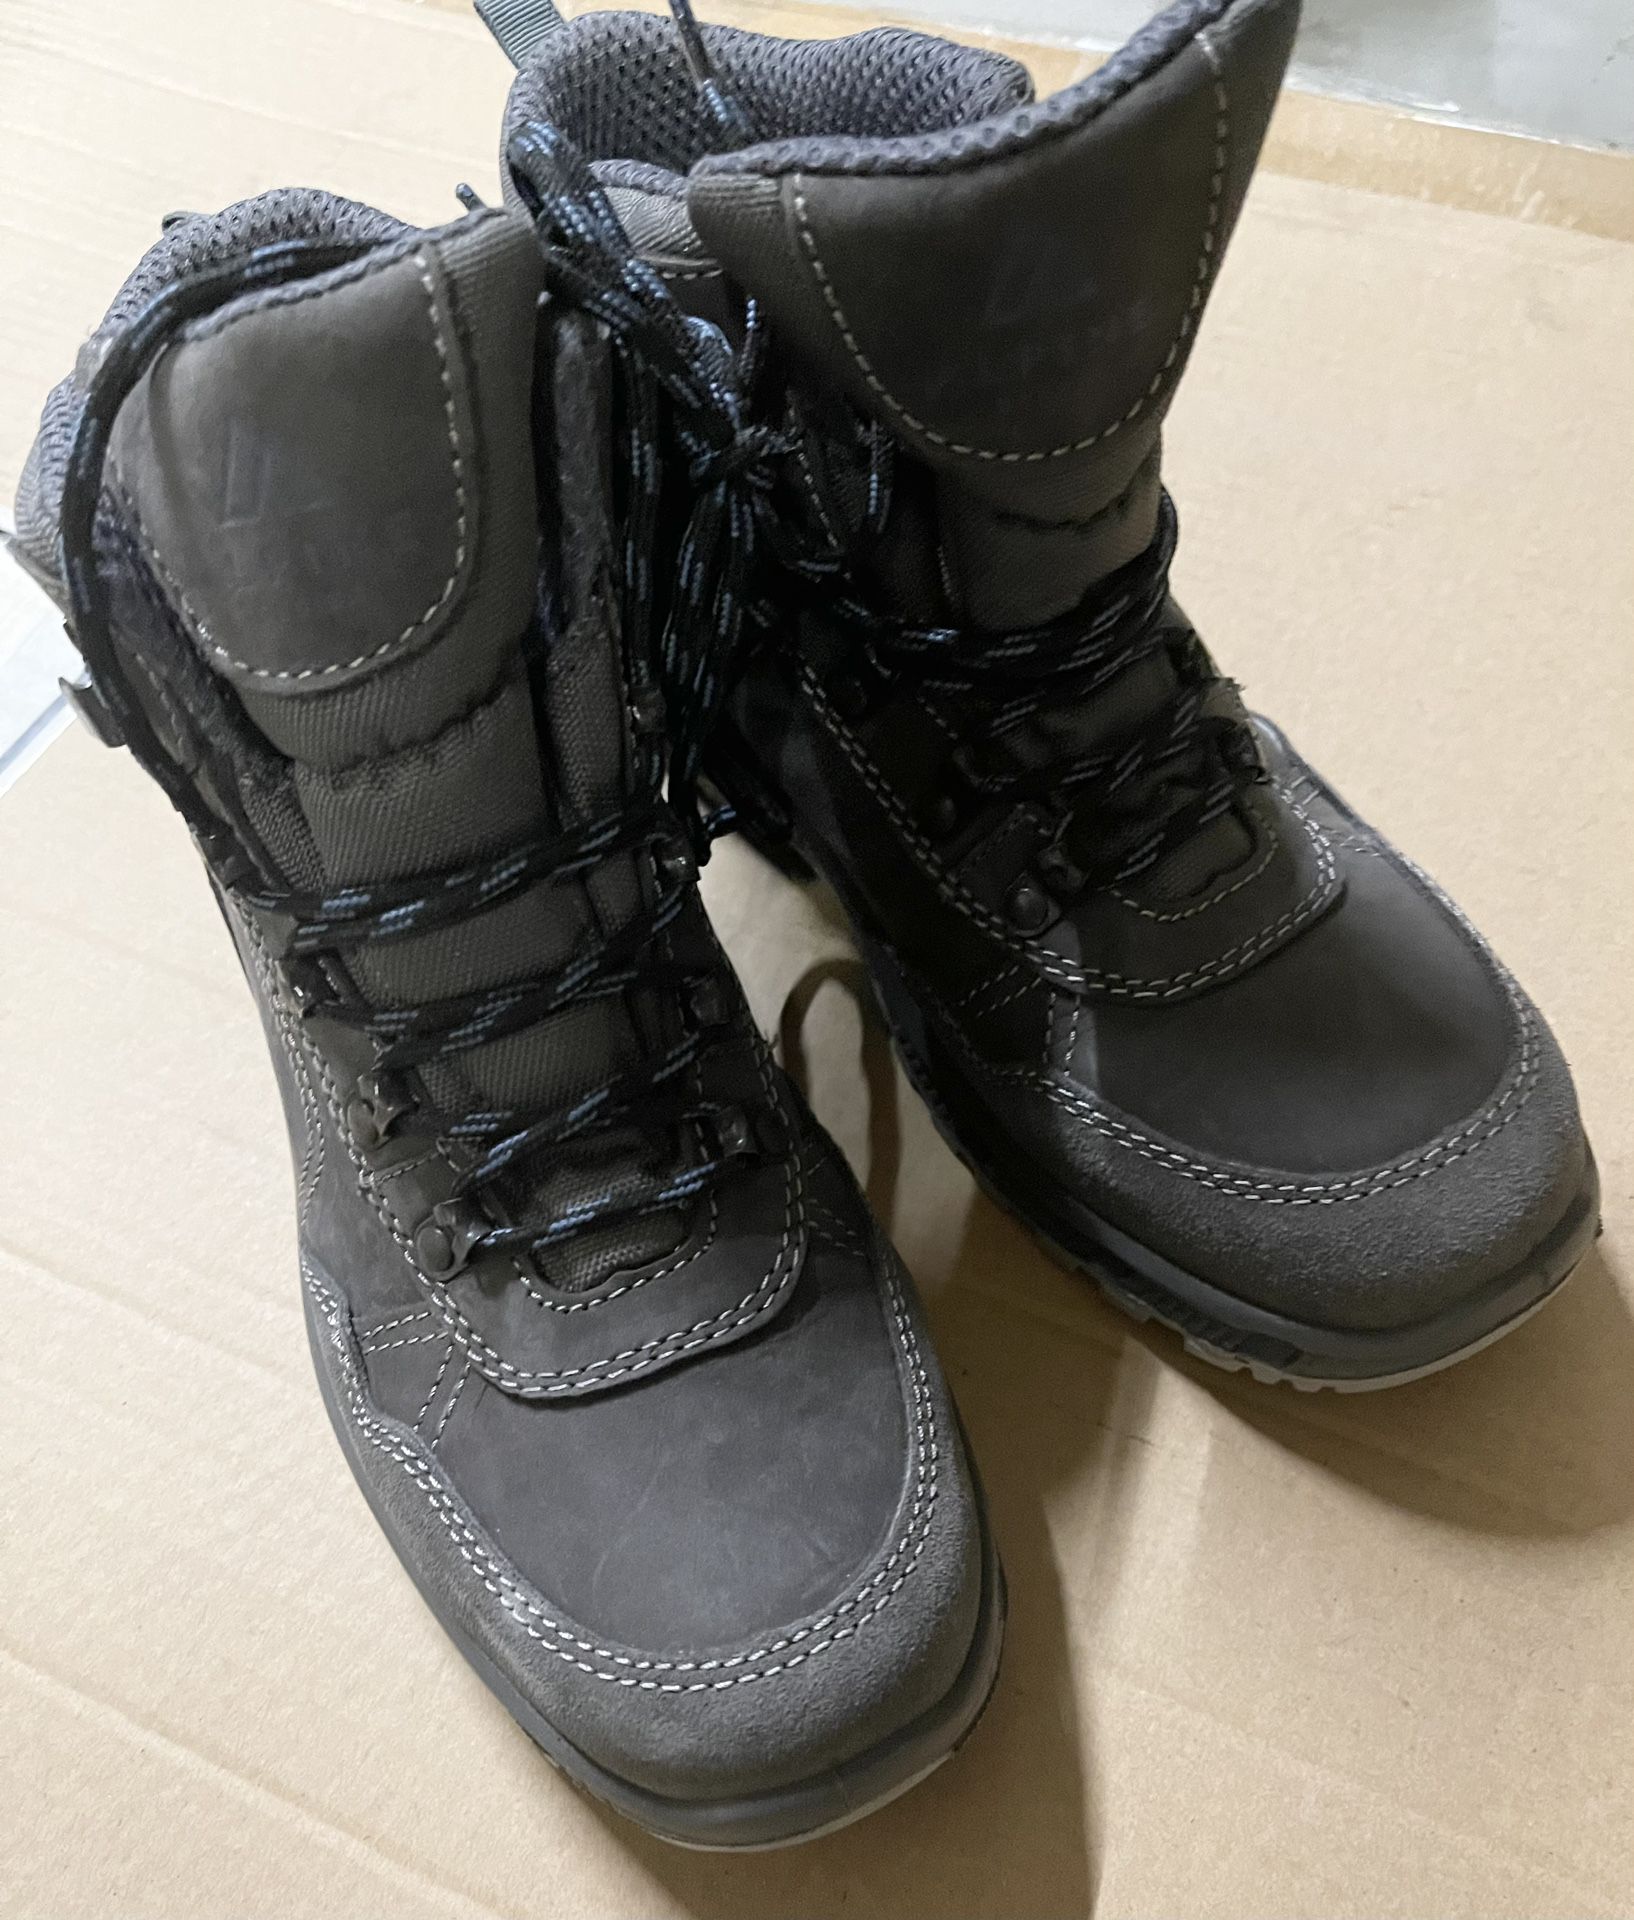 Alpine Design Black Lace-Up Snow Shield Winter Hiking Lined Boots. 